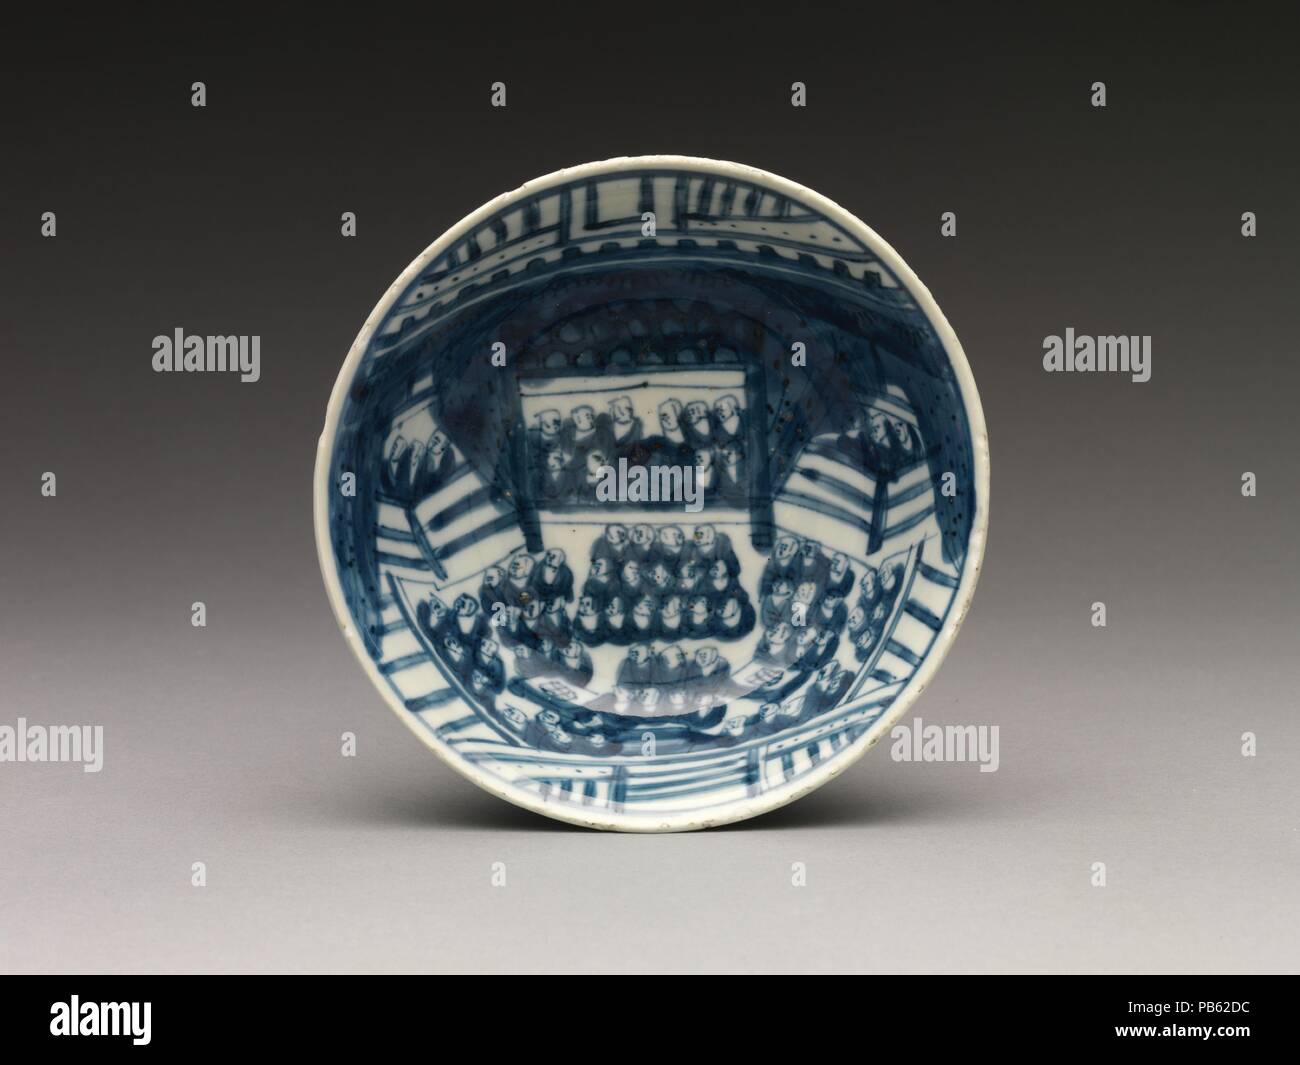 Bowl with Buddhist Assembly. Culture: China. Dimensions: H. 2 1/16 in. (5.2 cm); Diam. 6 in. (15.2 cm); Diam. of foot 2 3/8 in. (6 cm).  Made for use in Japan, either in a Buddhist context or as part of a meal during a Japanese tea ceremony, this charming bowl is painted with a rare scene of a Buddhist assembly. Museum: Metropolitan Museum of Art, New York, USA. Stock Photo